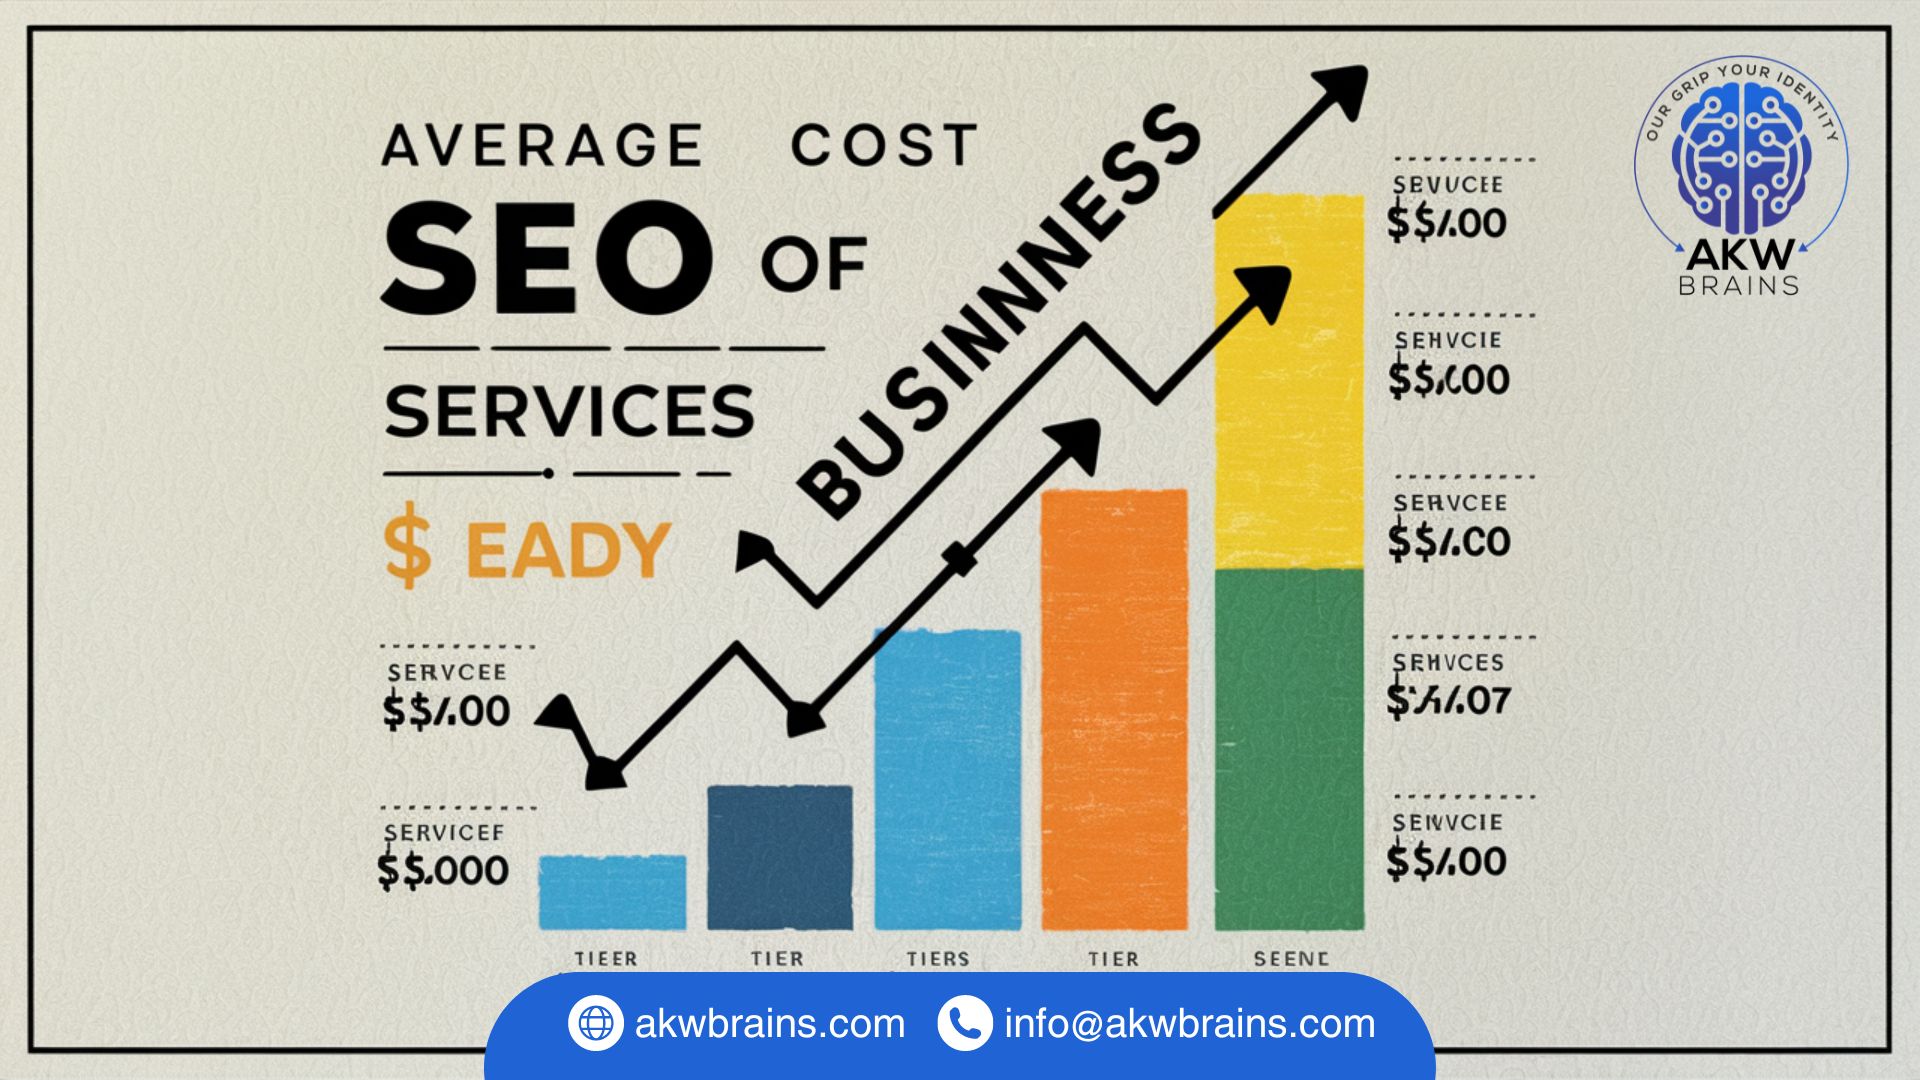 What is the Average Cost for SEO Services